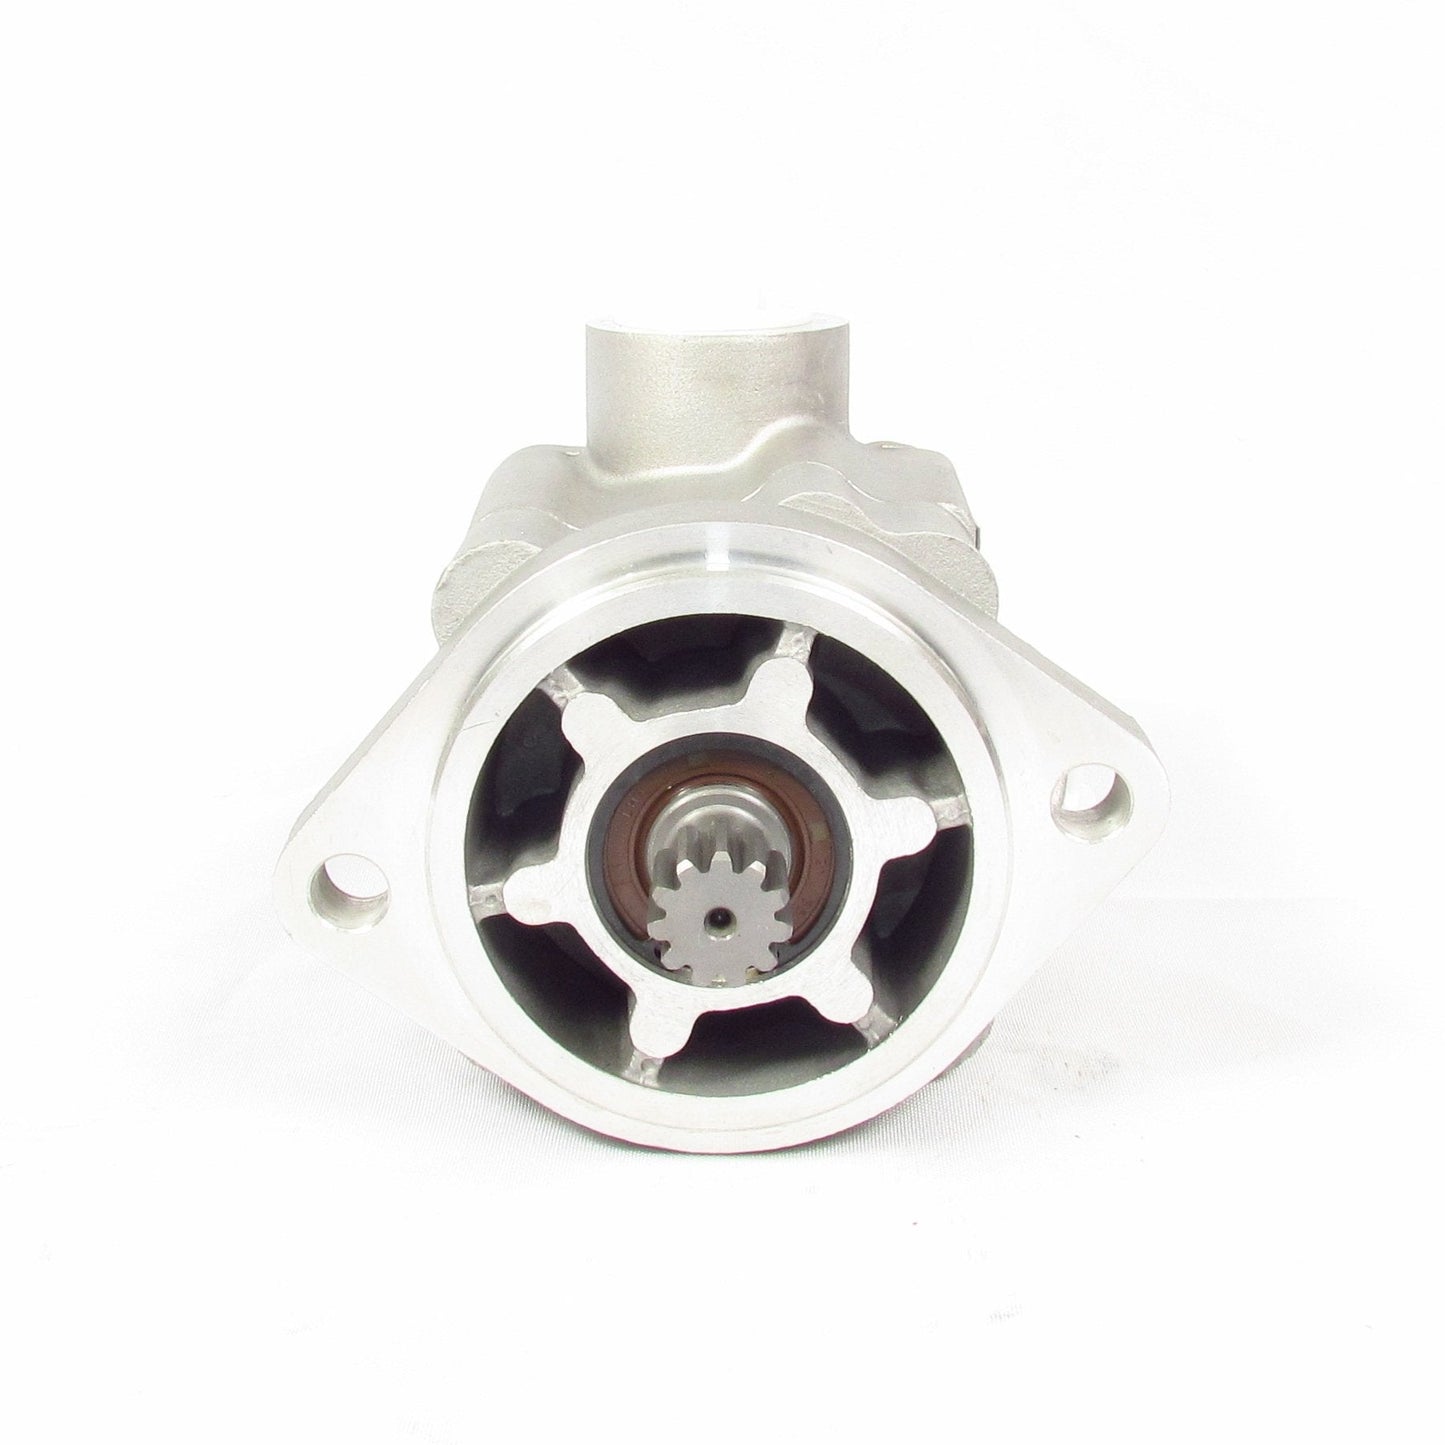 F255711 | POWER STEERING PUMP | Replace 2108653 | 542-0267-10